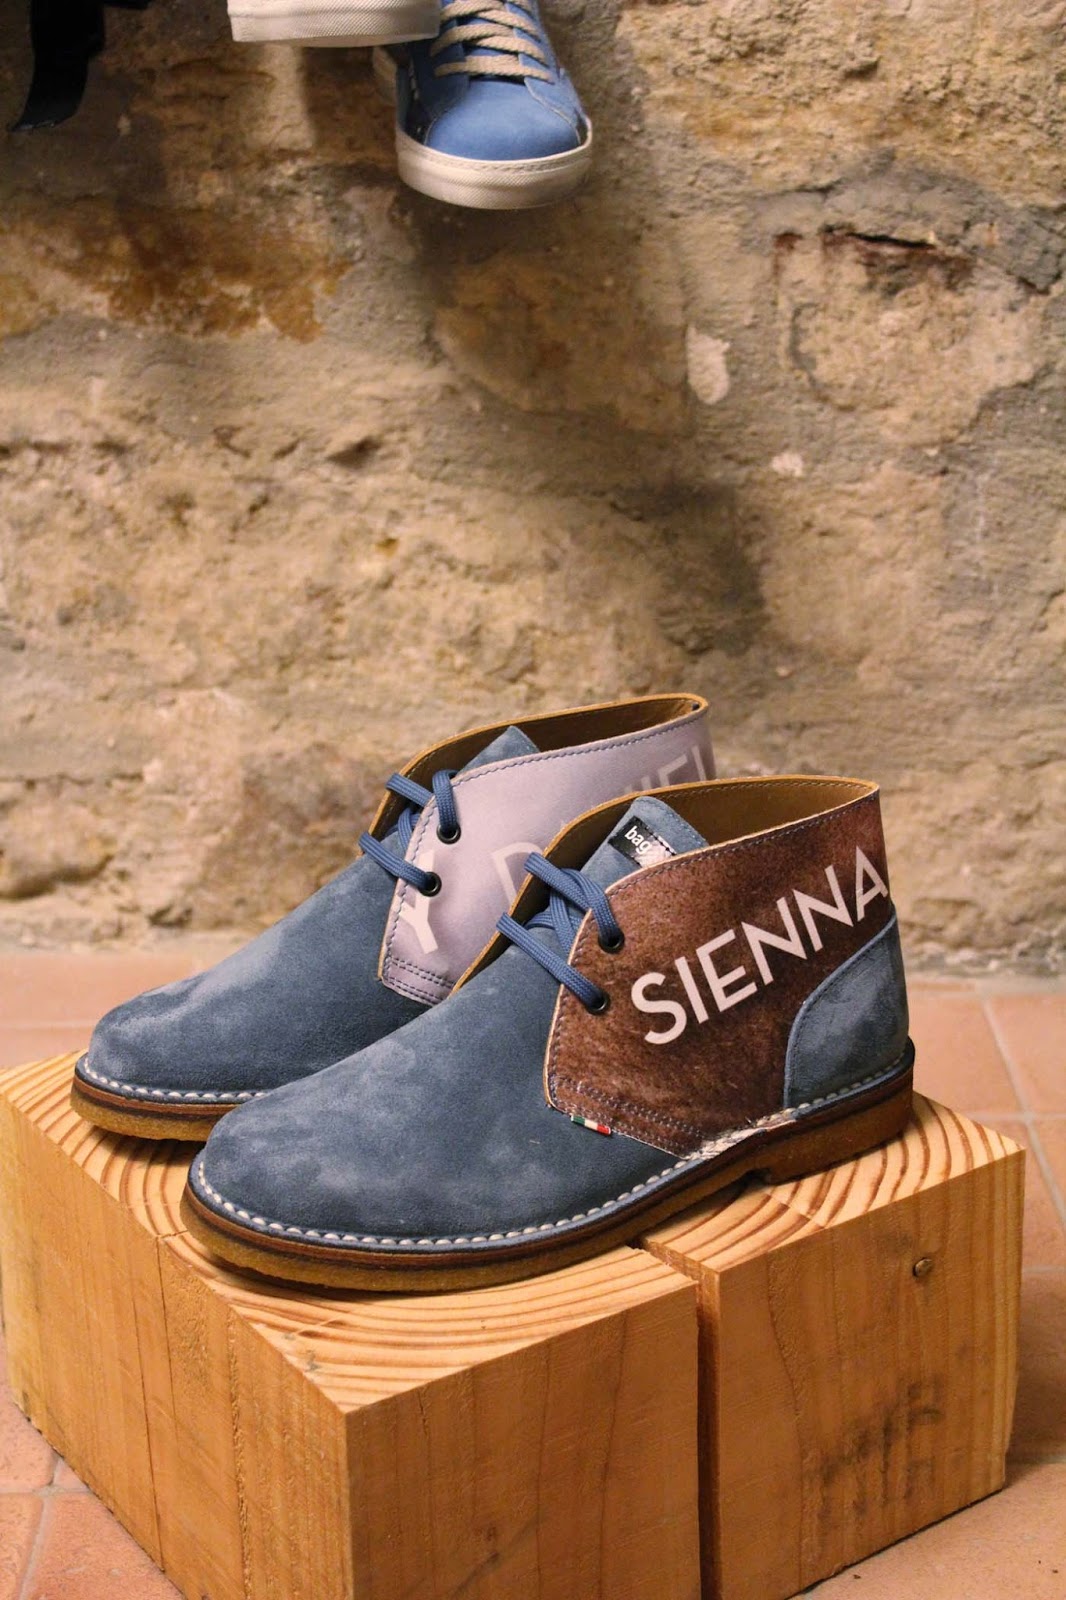 Eniwhere Fashion - Bislacco Shop - Made in Italy shoes